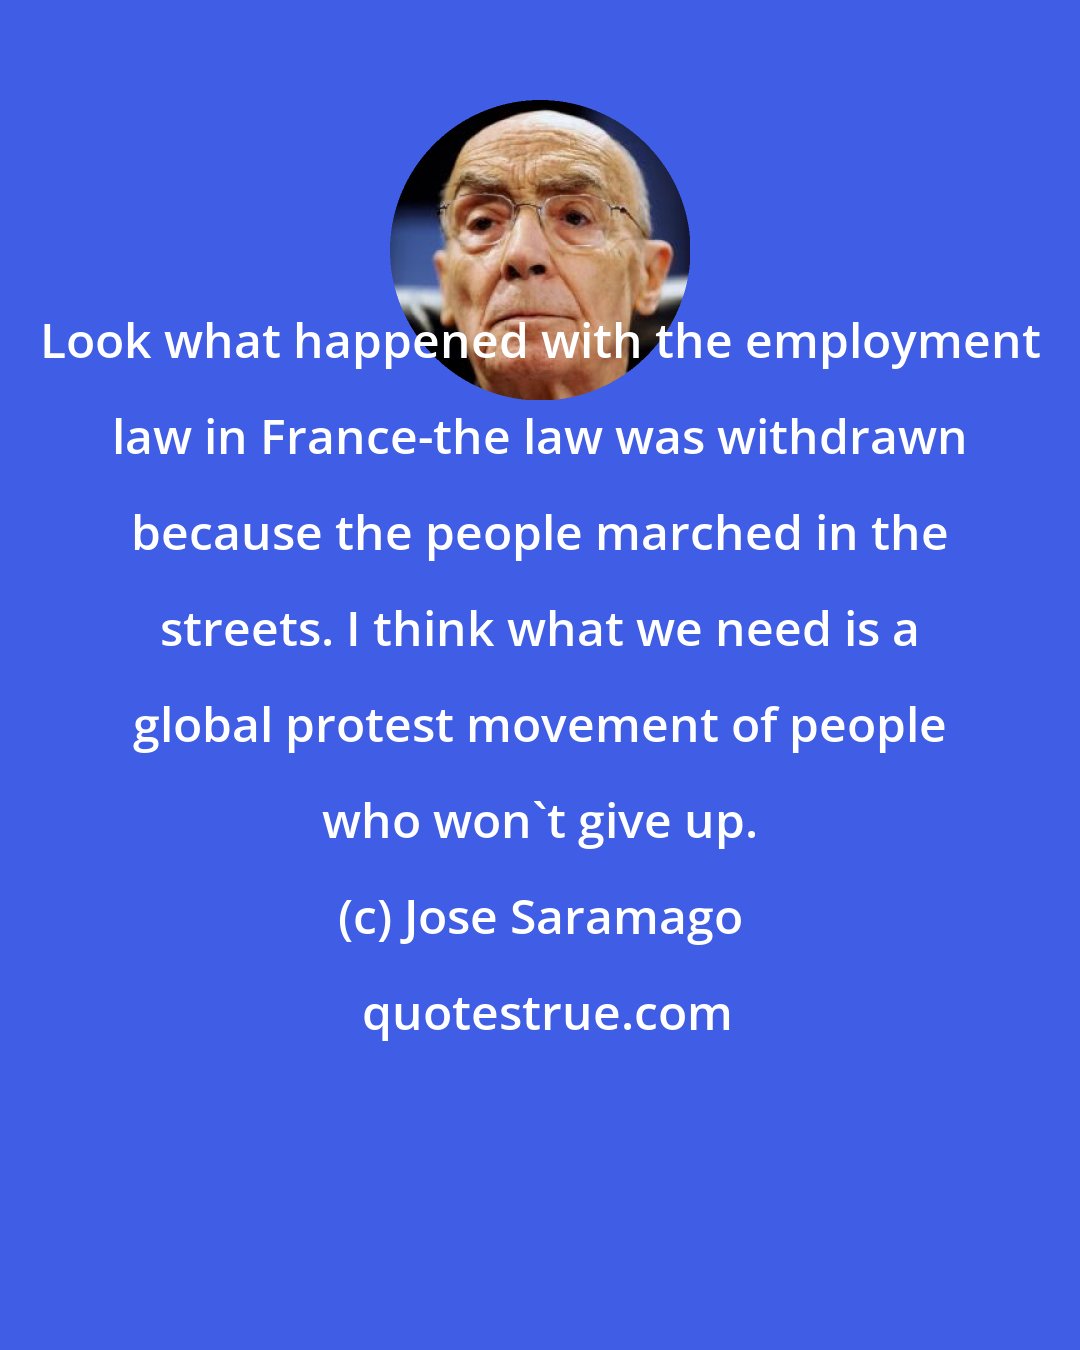 Jose Saramago: Look what happened with the employment law in France-the law was withdrawn because the people marched in the streets. I think what we need is a global protest movement of people who won't give up.